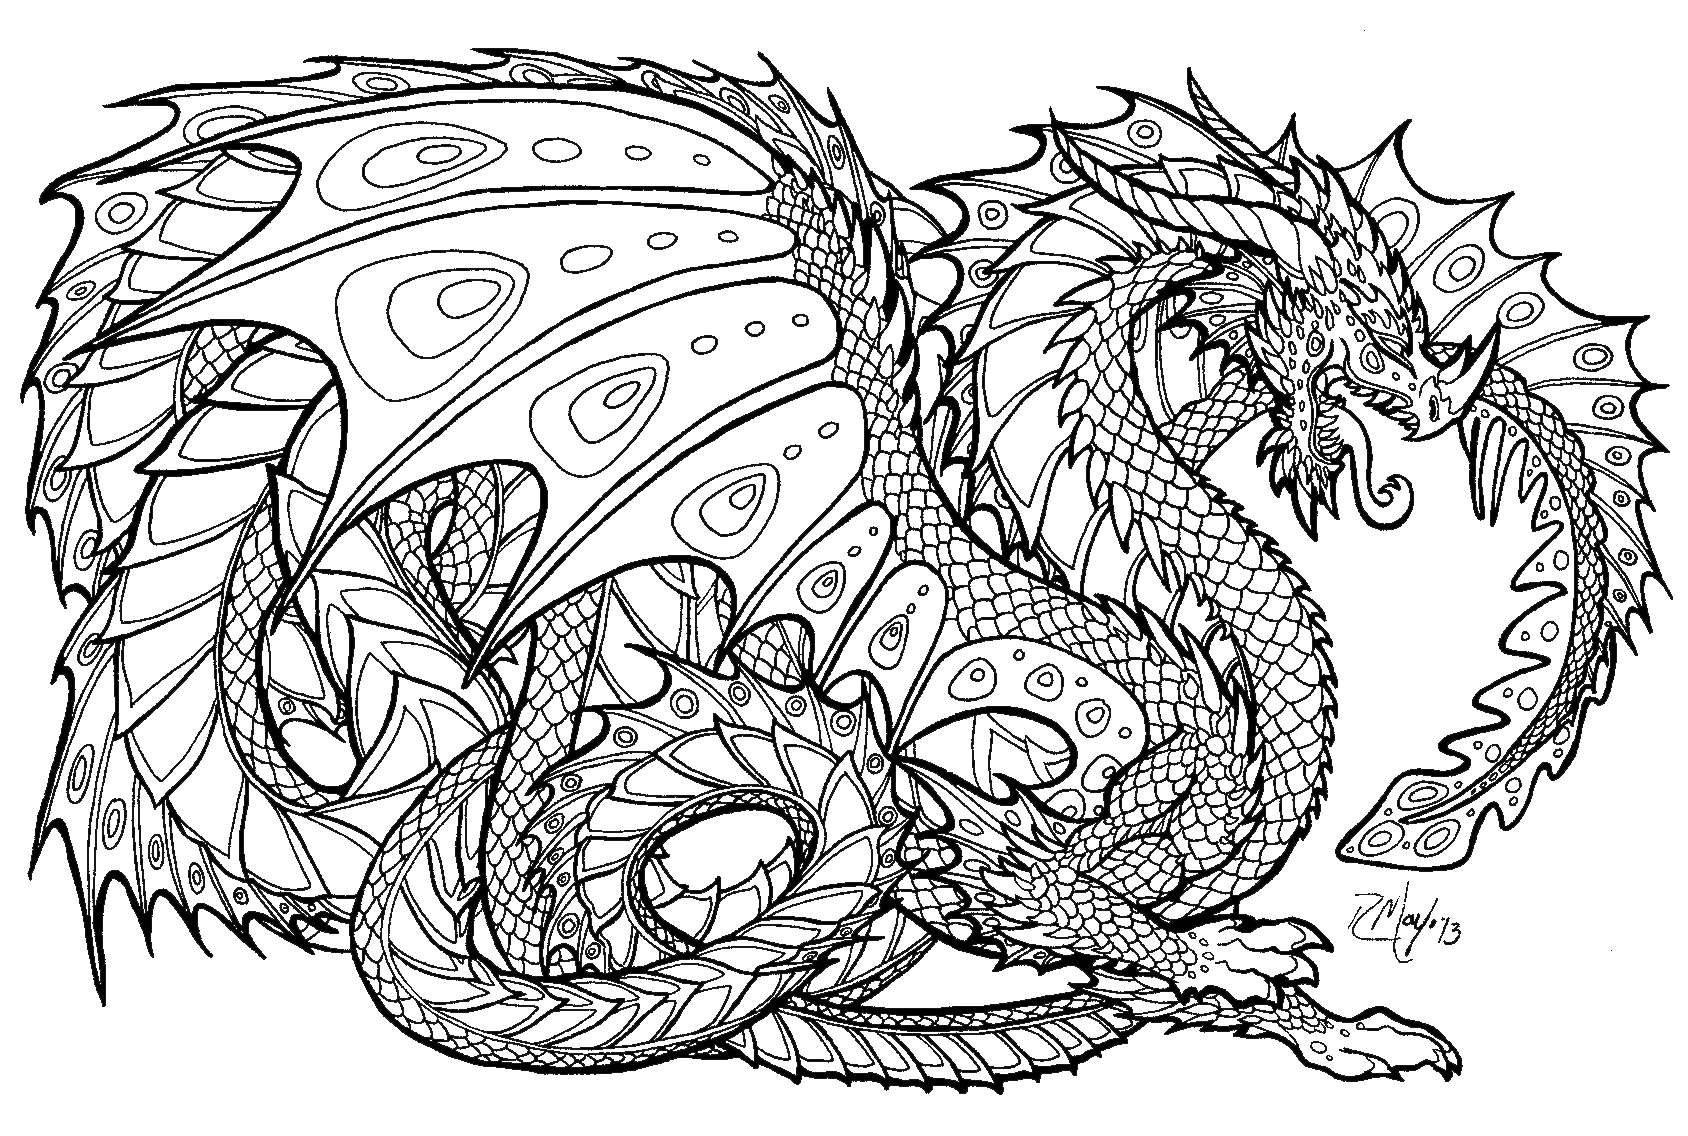 Amazing of Free Coloring Pages For Adults On Coloring Pa #236